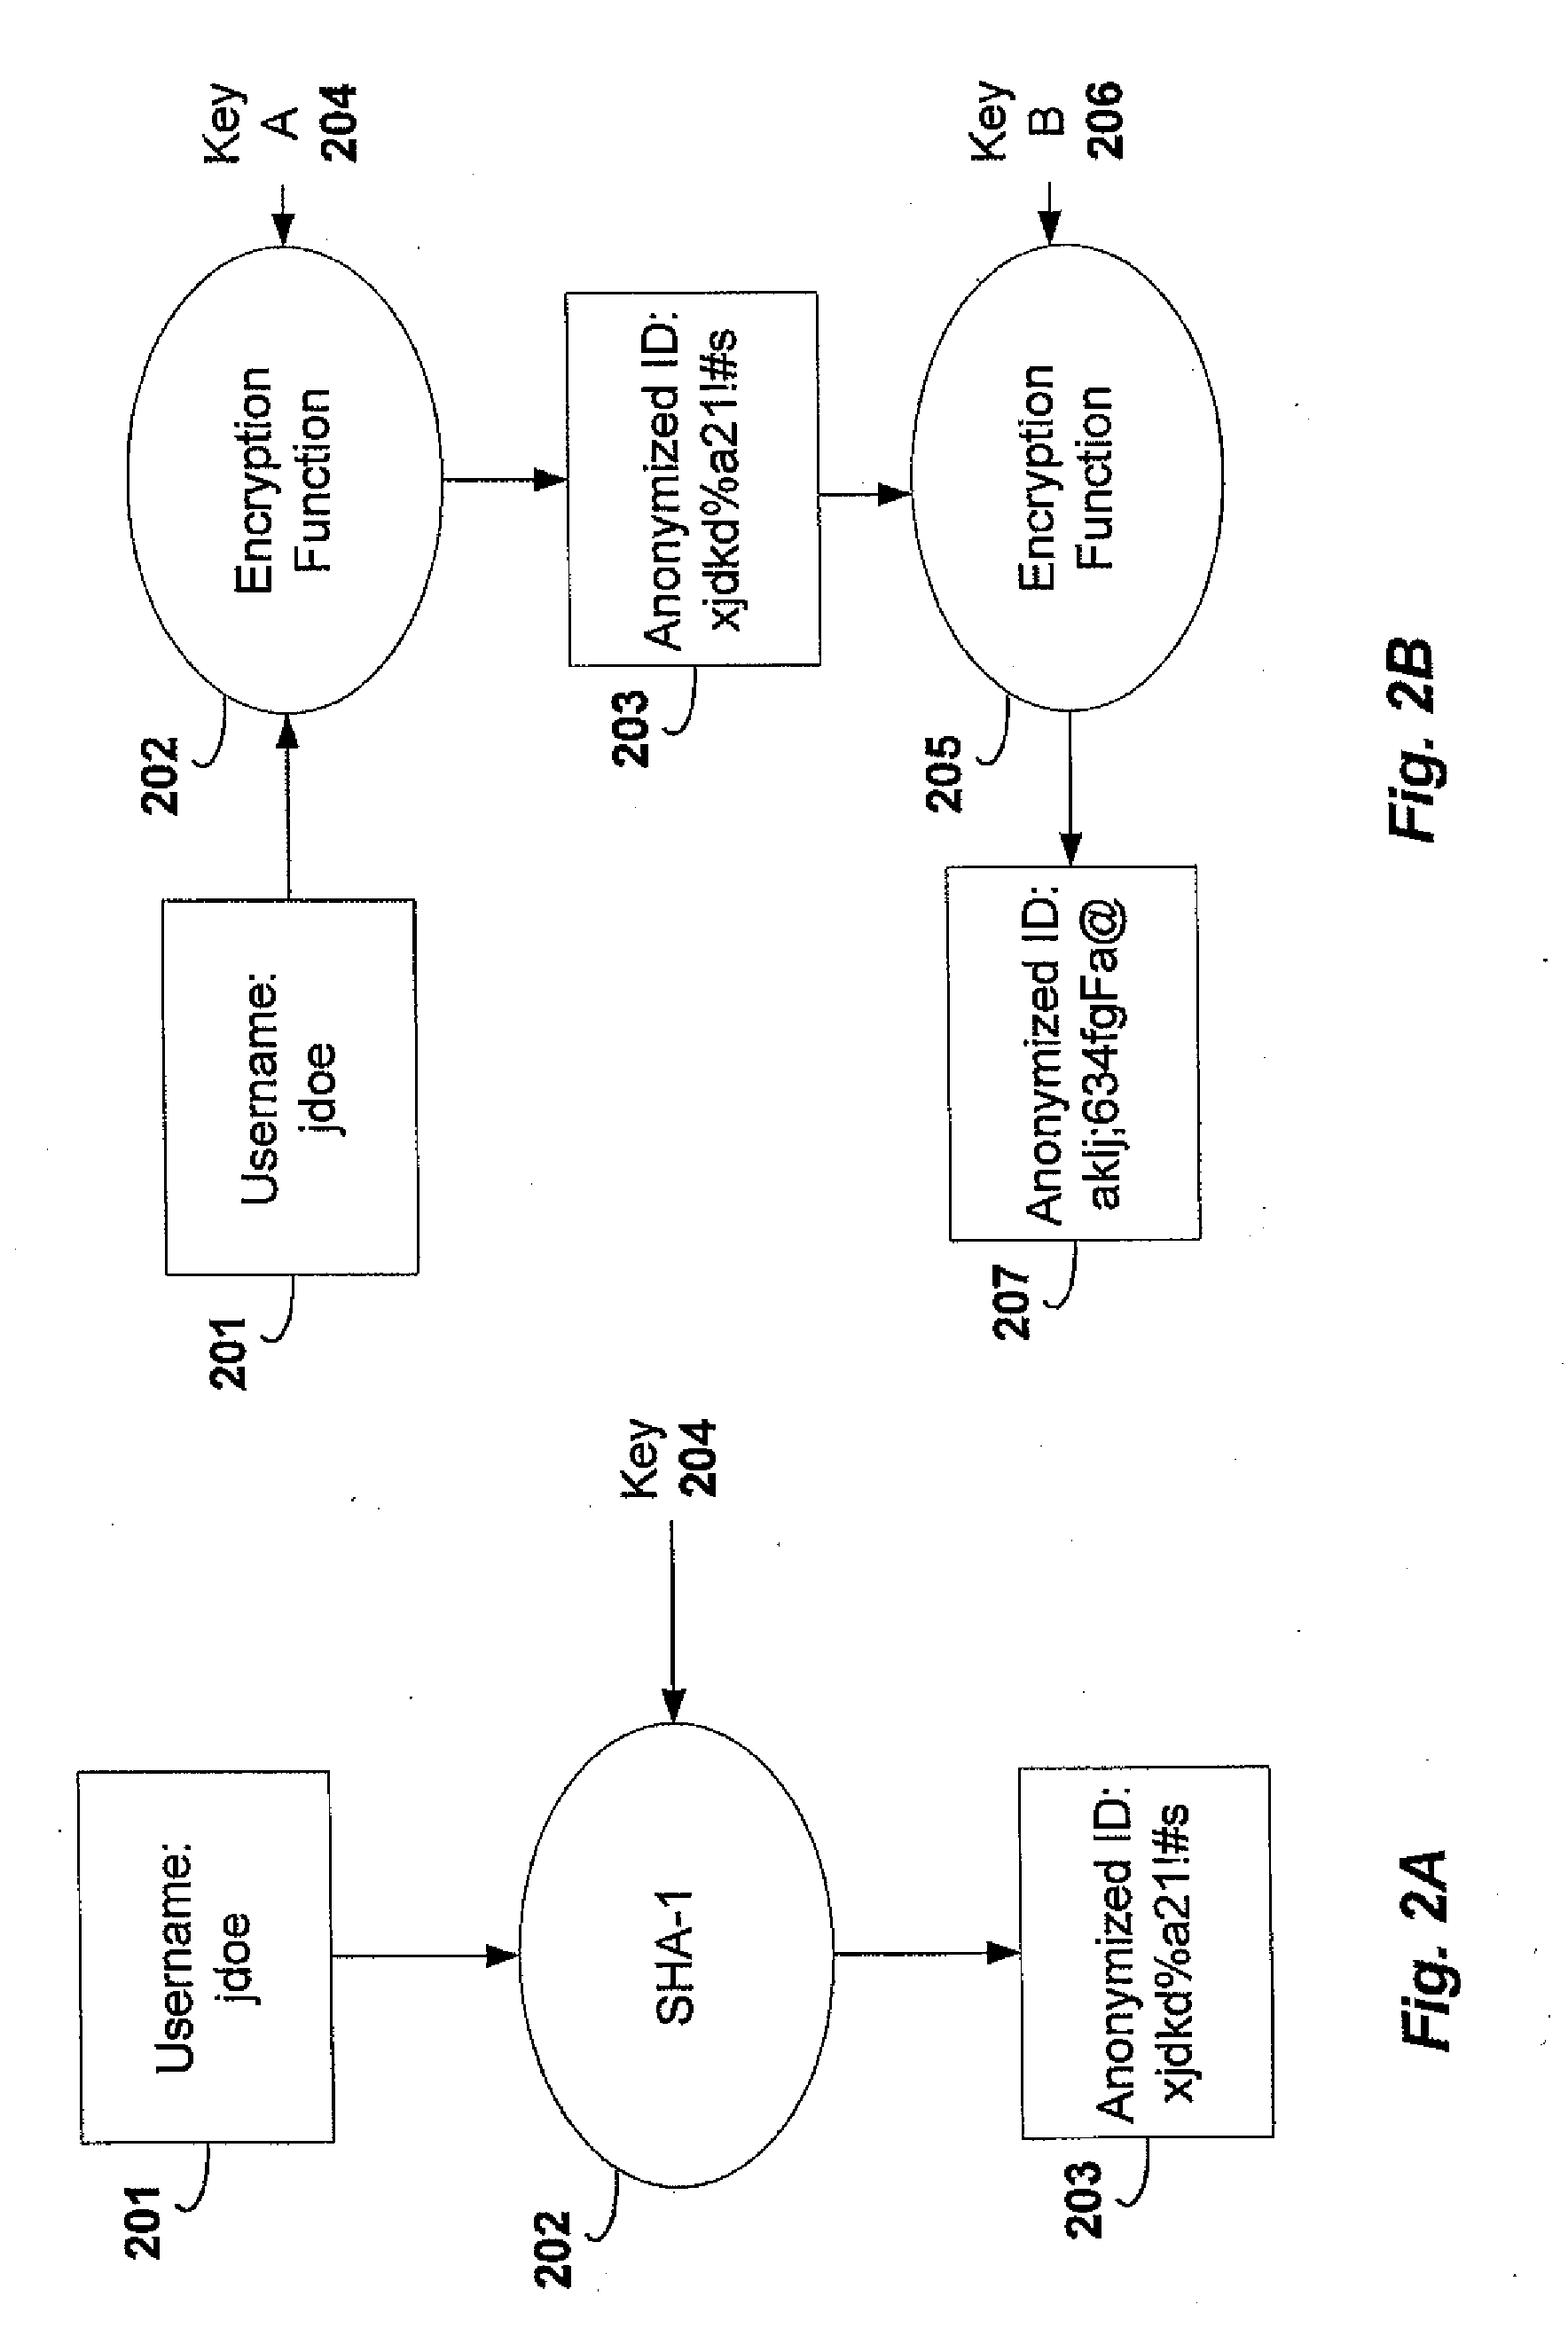 Method and system for monitoring online computer network behavior and creating online behavior profiles